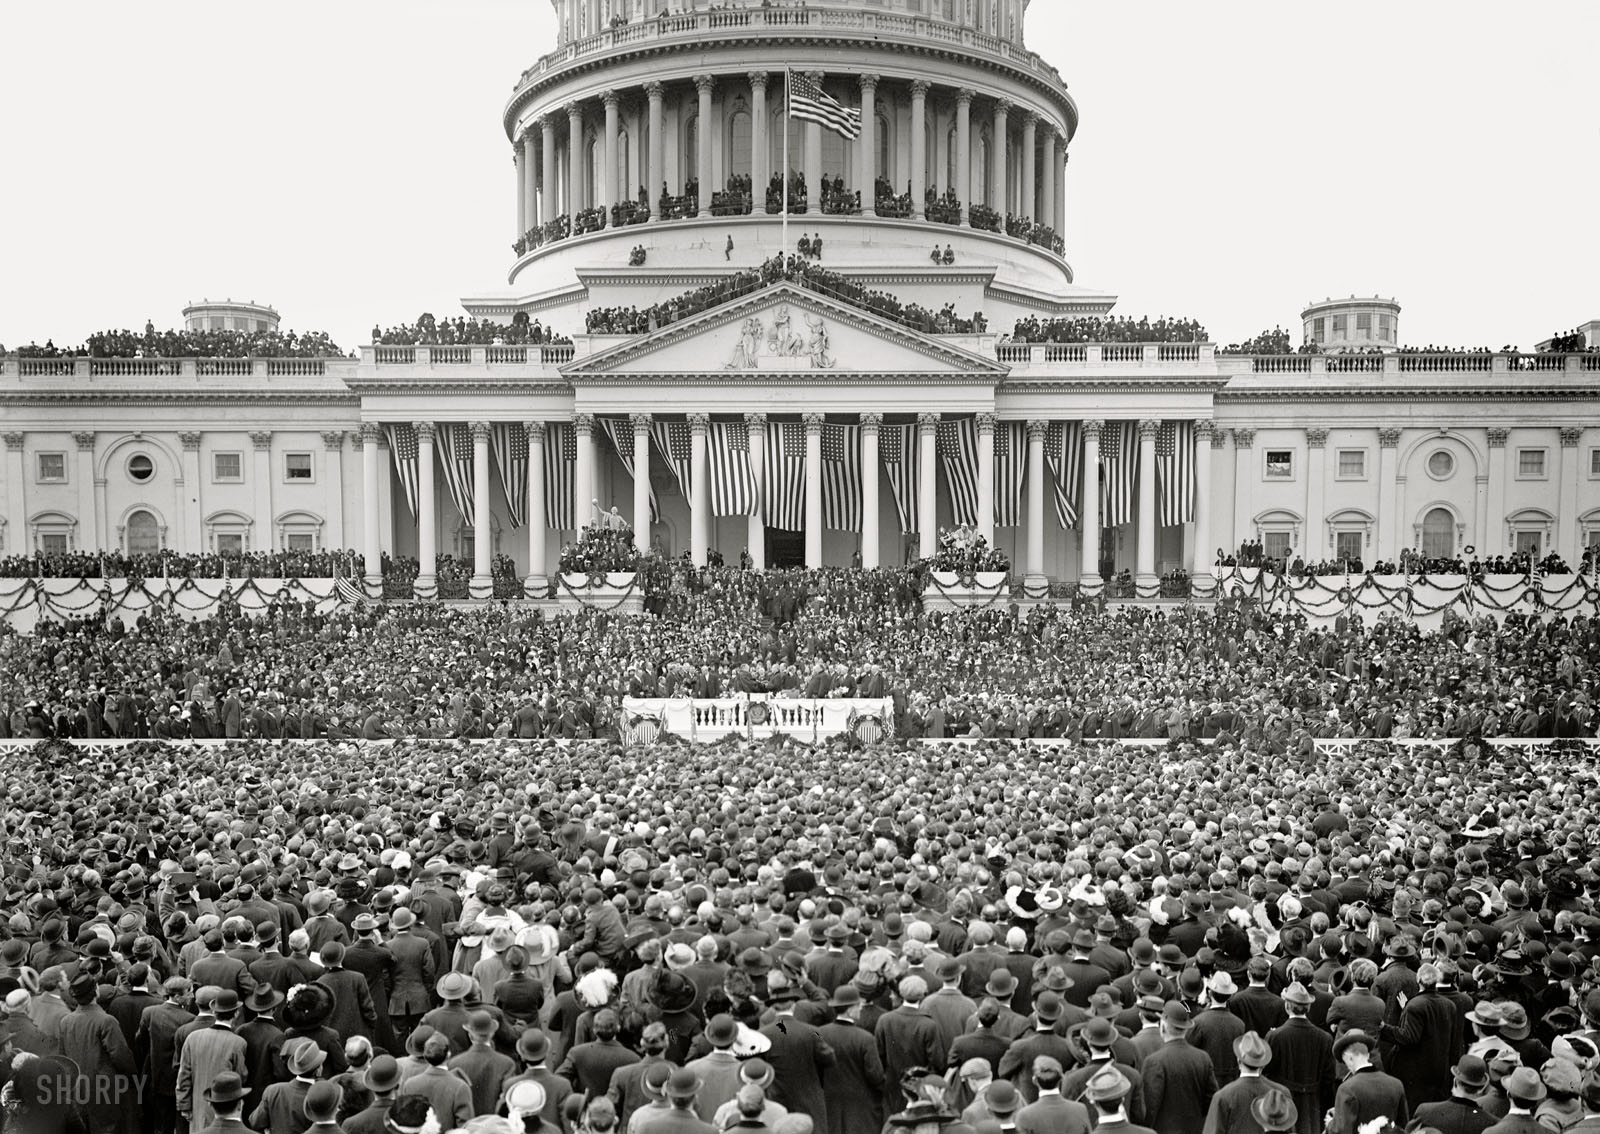 March 4, 1913. "Inaugural ceremony, East Front of Capitol." Woodrow Wilson being sworn in as 28th president of the United States. View full size.